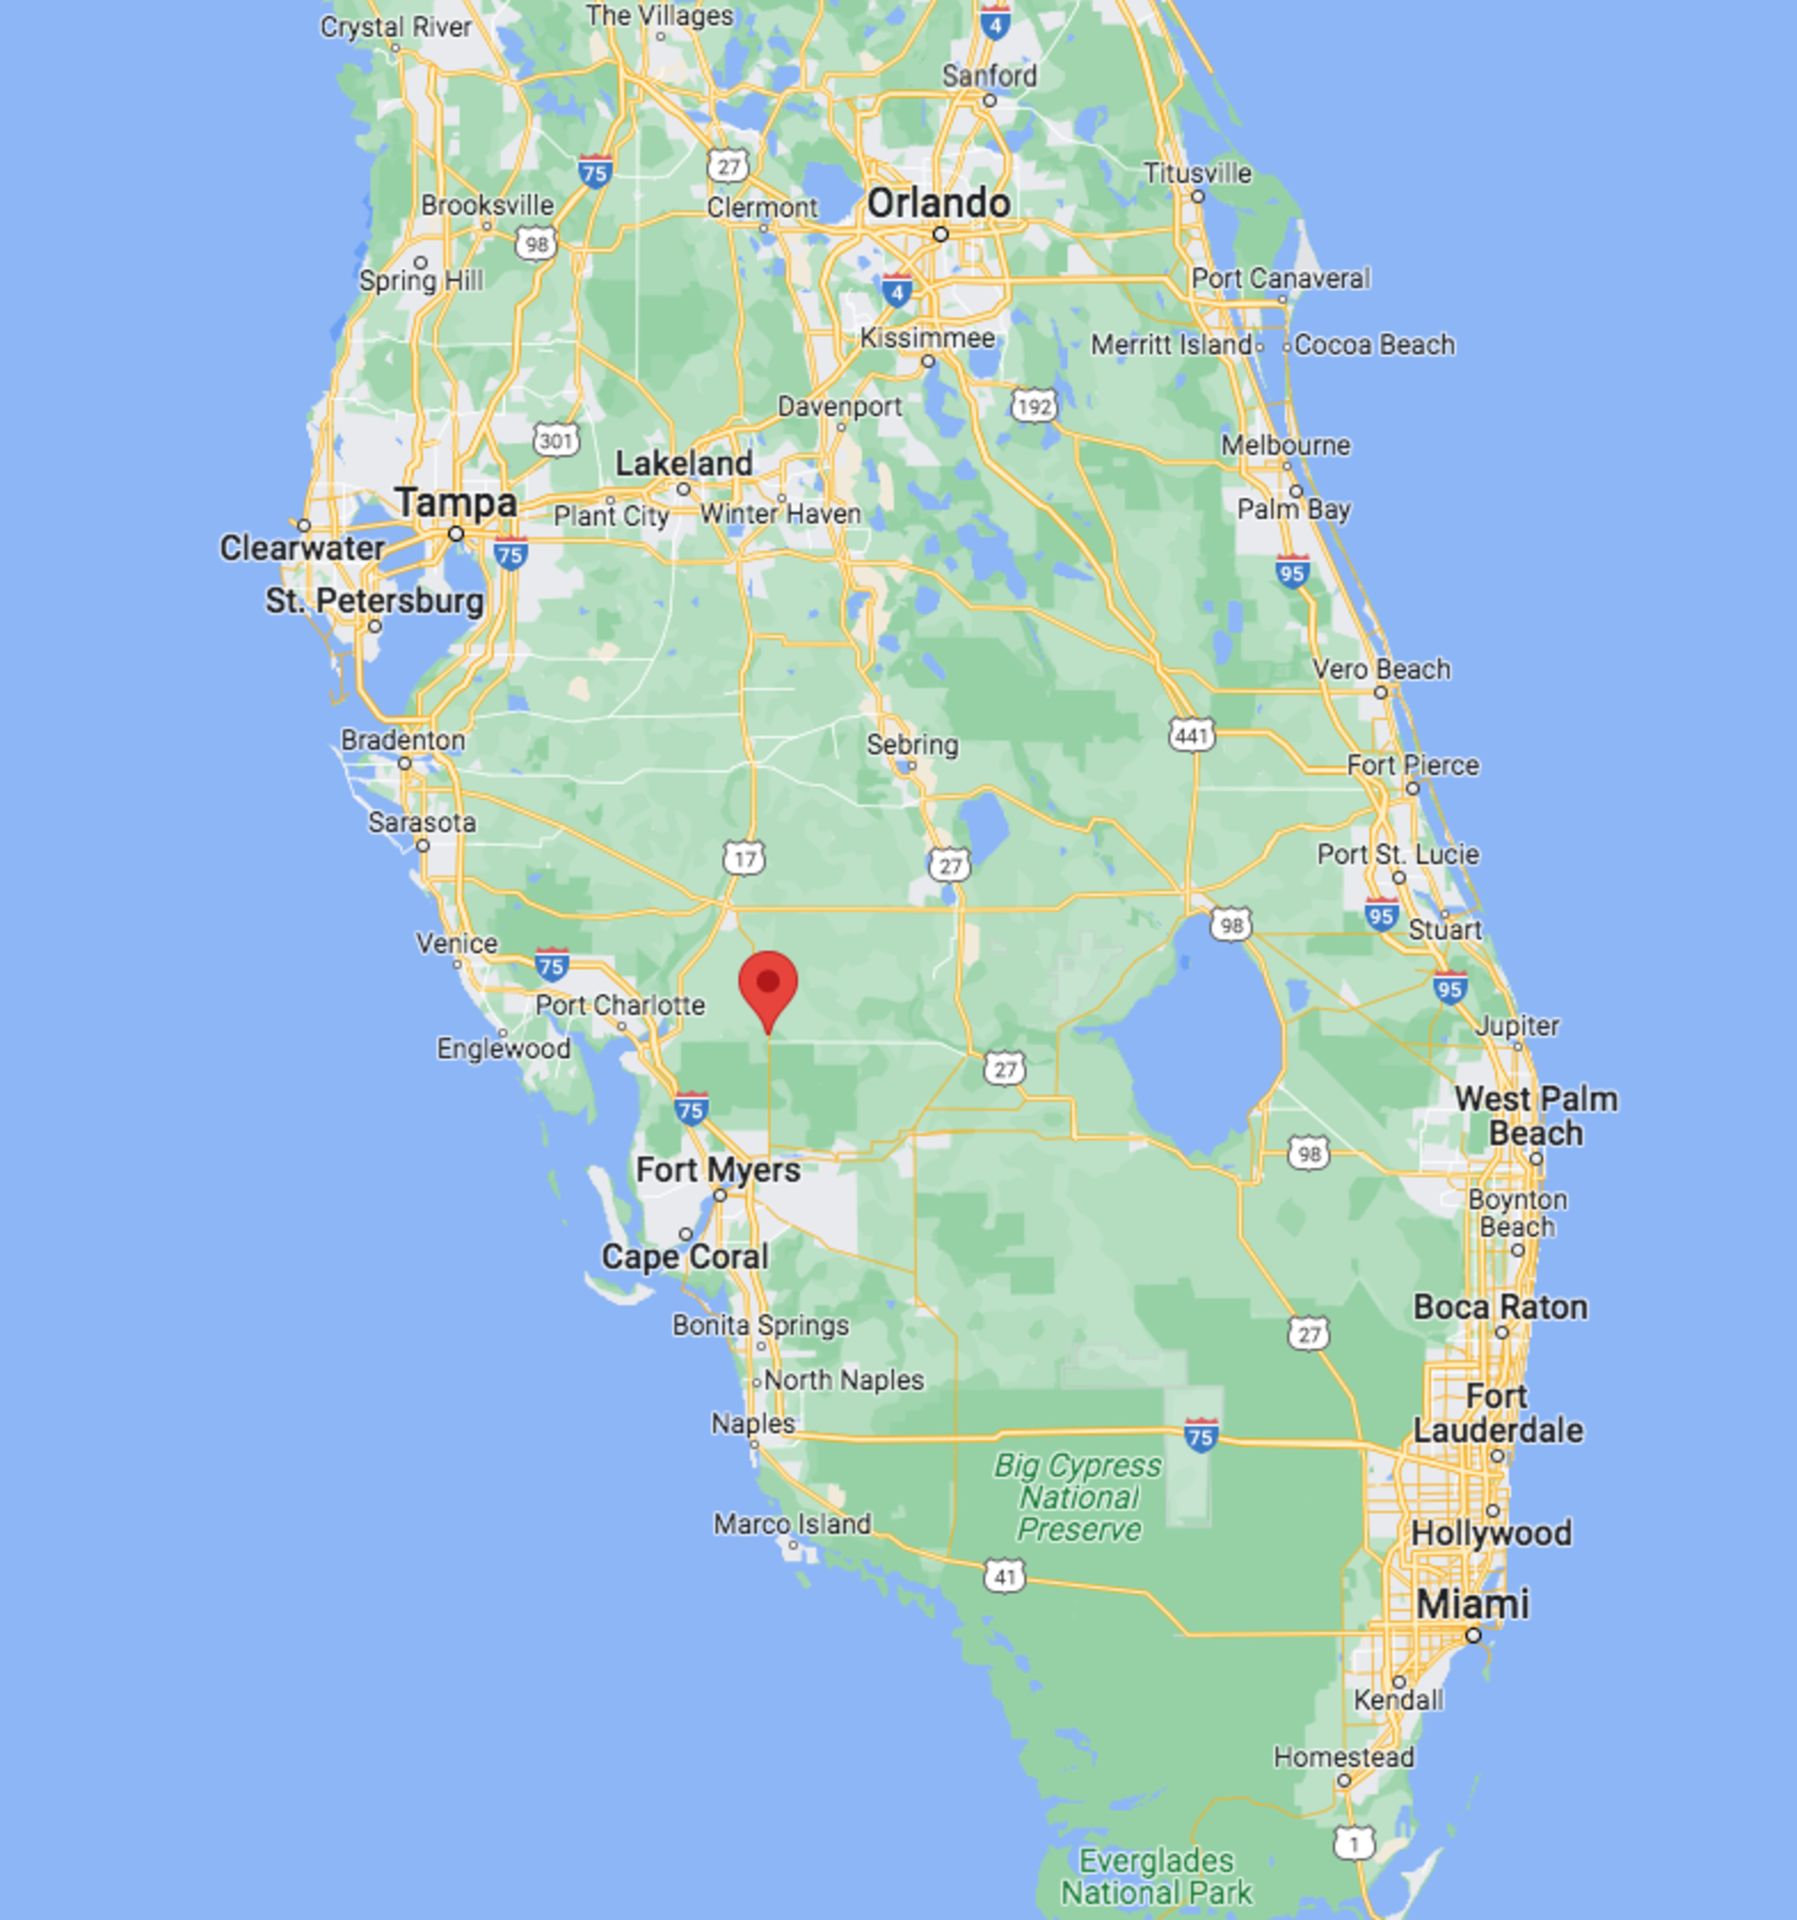 Claim Your Piece of Land in Charlotte County, Florida! - Image 12 of 12